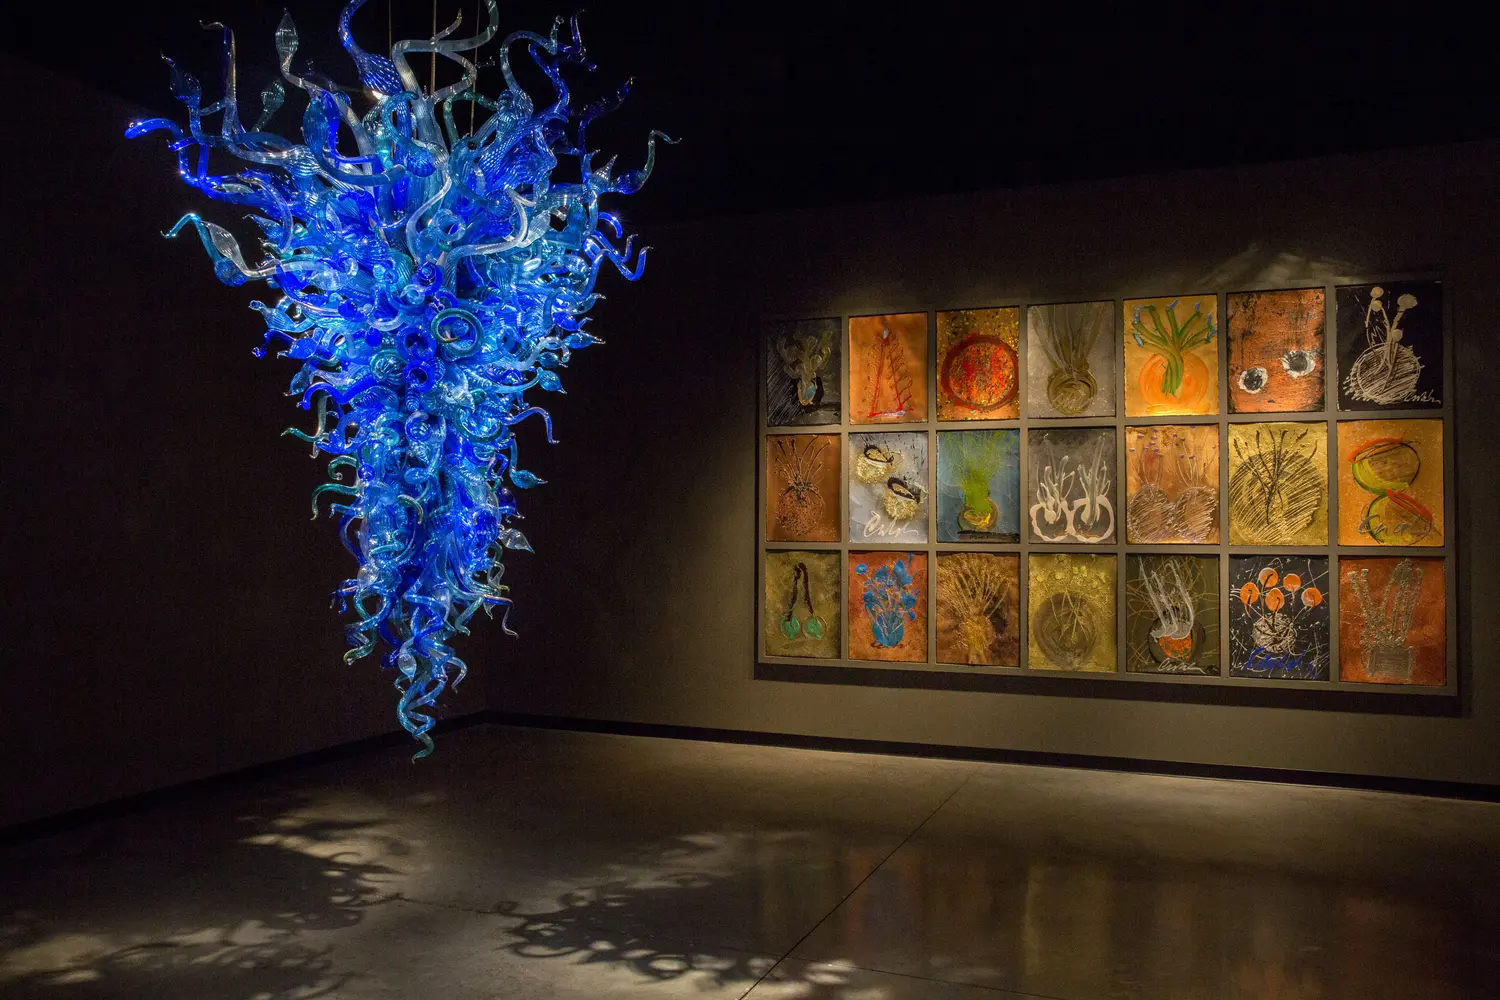 Chihuly Collection in St. Petersburg, Florida